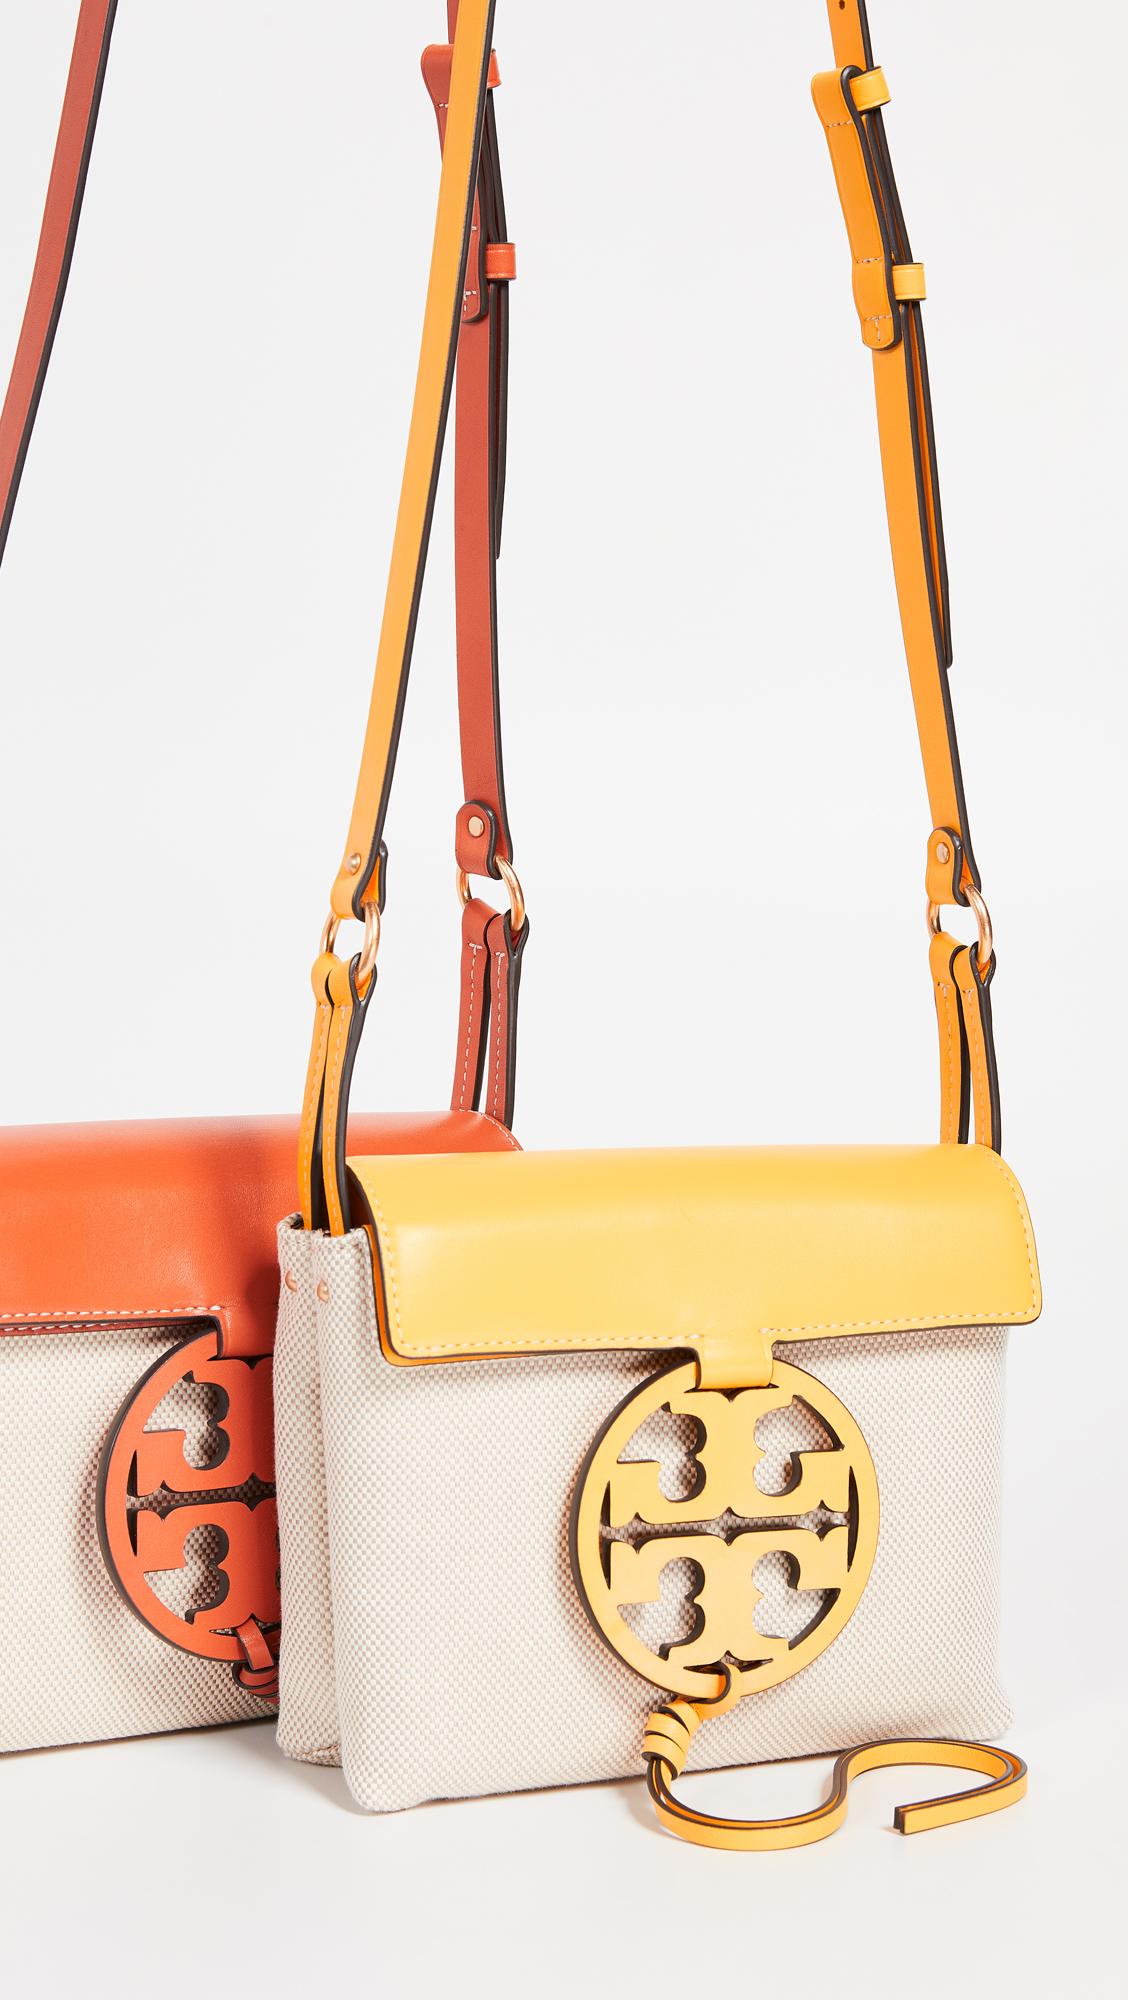 Tory Burch Bags Macy's | The Art of Mike Mignola